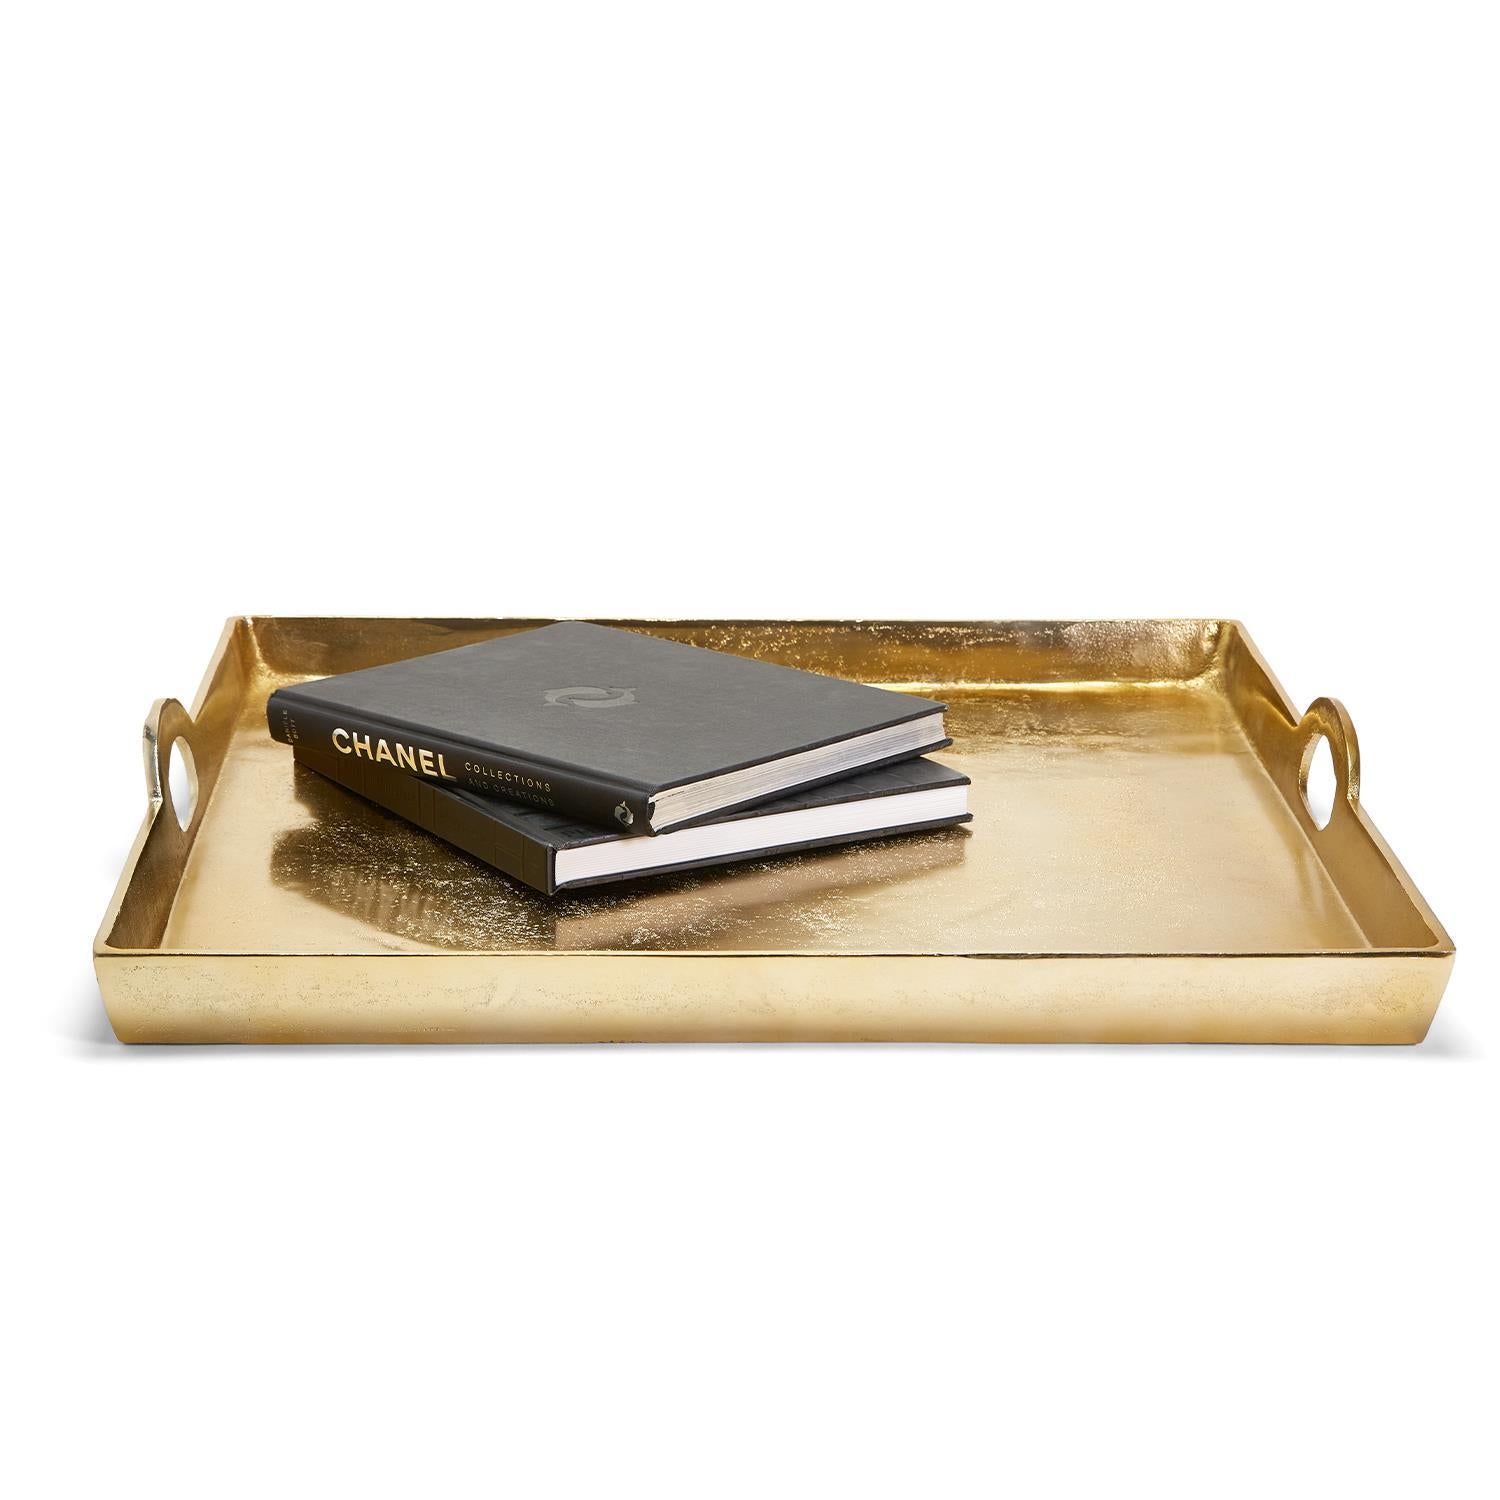 Two's Company Gold Hotel De Ville Decorative Square Tray Recycled Aluminum